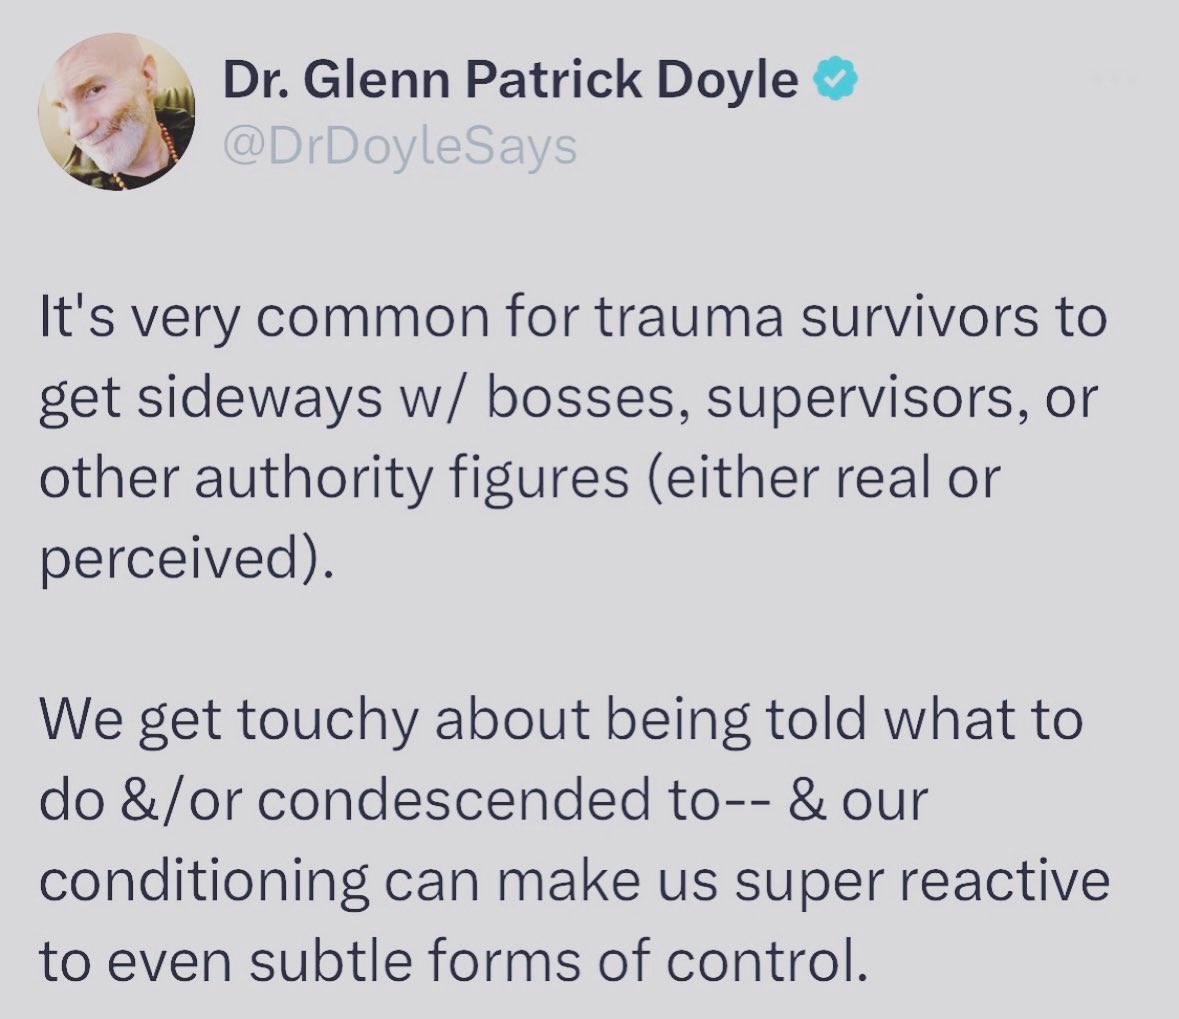 Hypervigilance in trauma survivors means interactions with authority figures can be stressful and anxiety-inducing. 

For trauma survivors, authority figures may symbolize past threats, leading to mistrust & resistance.

Thanks @DrDoyleSays for the reflection 🙏🏾 #TraumaInformed